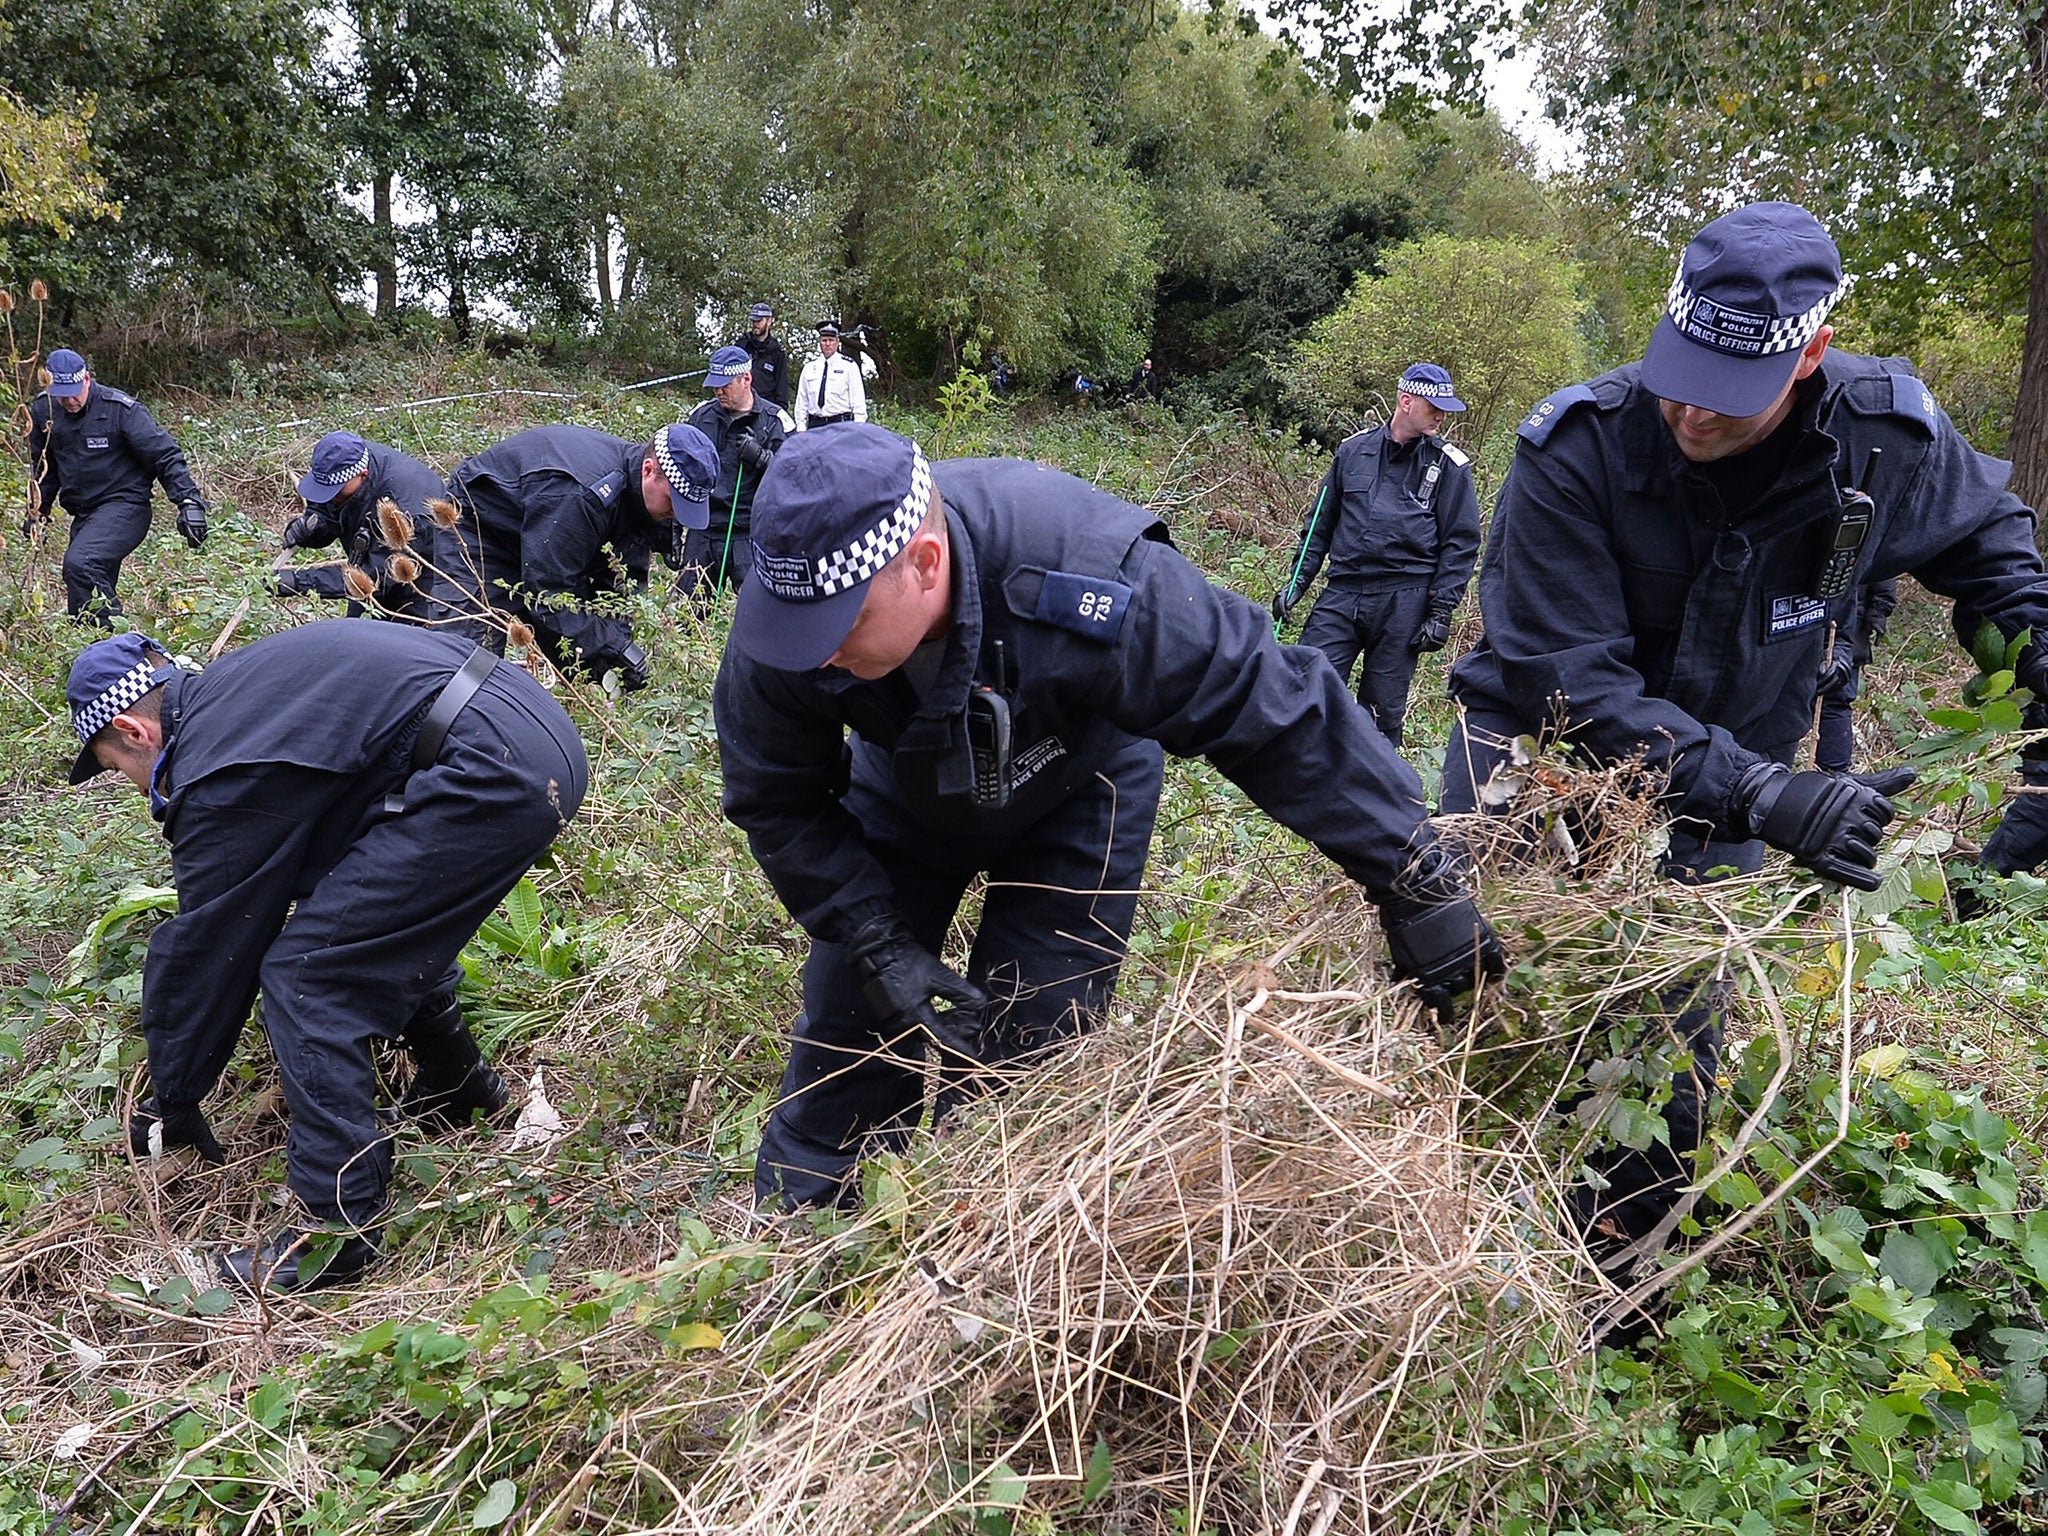 Police go over a section of wasteland near the river Brent in west London during the search for Alice Gross